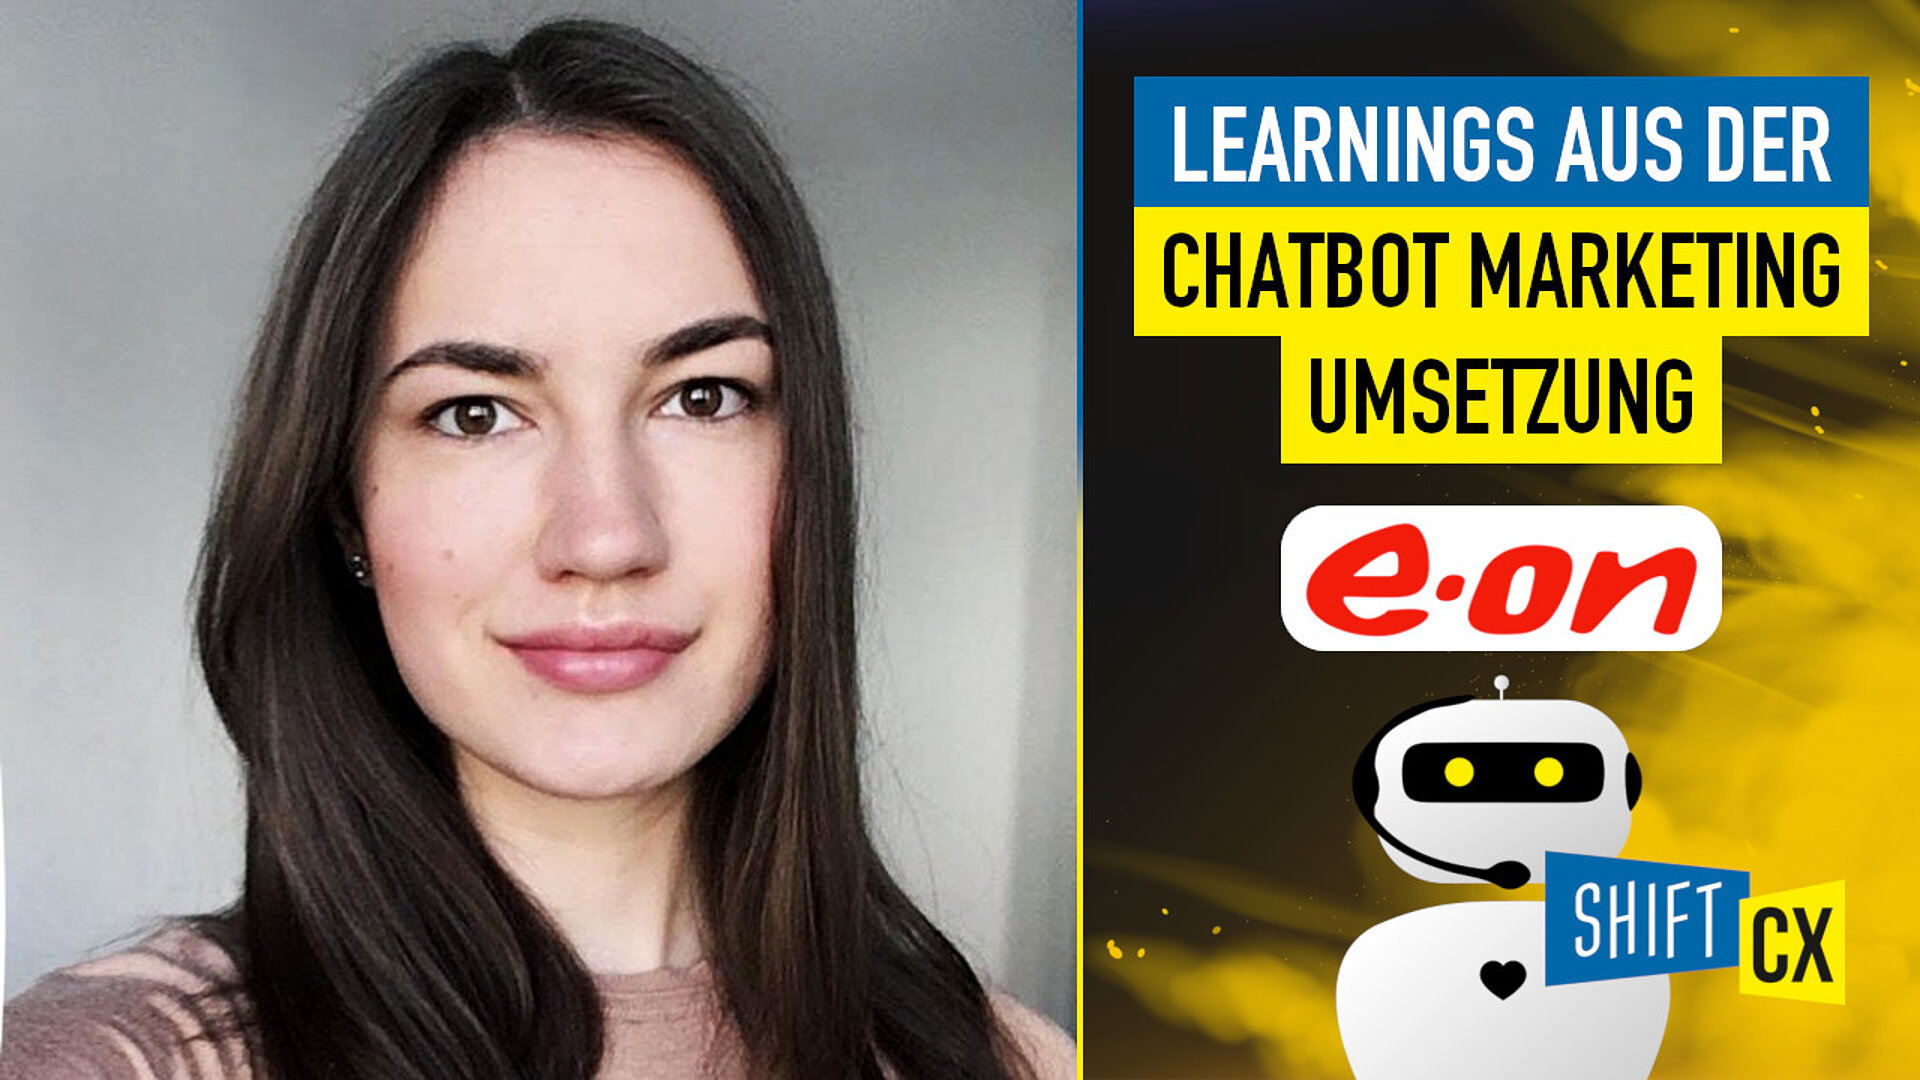 Learnings aus der Chatbot Marketing Umsetzung bei E.ON